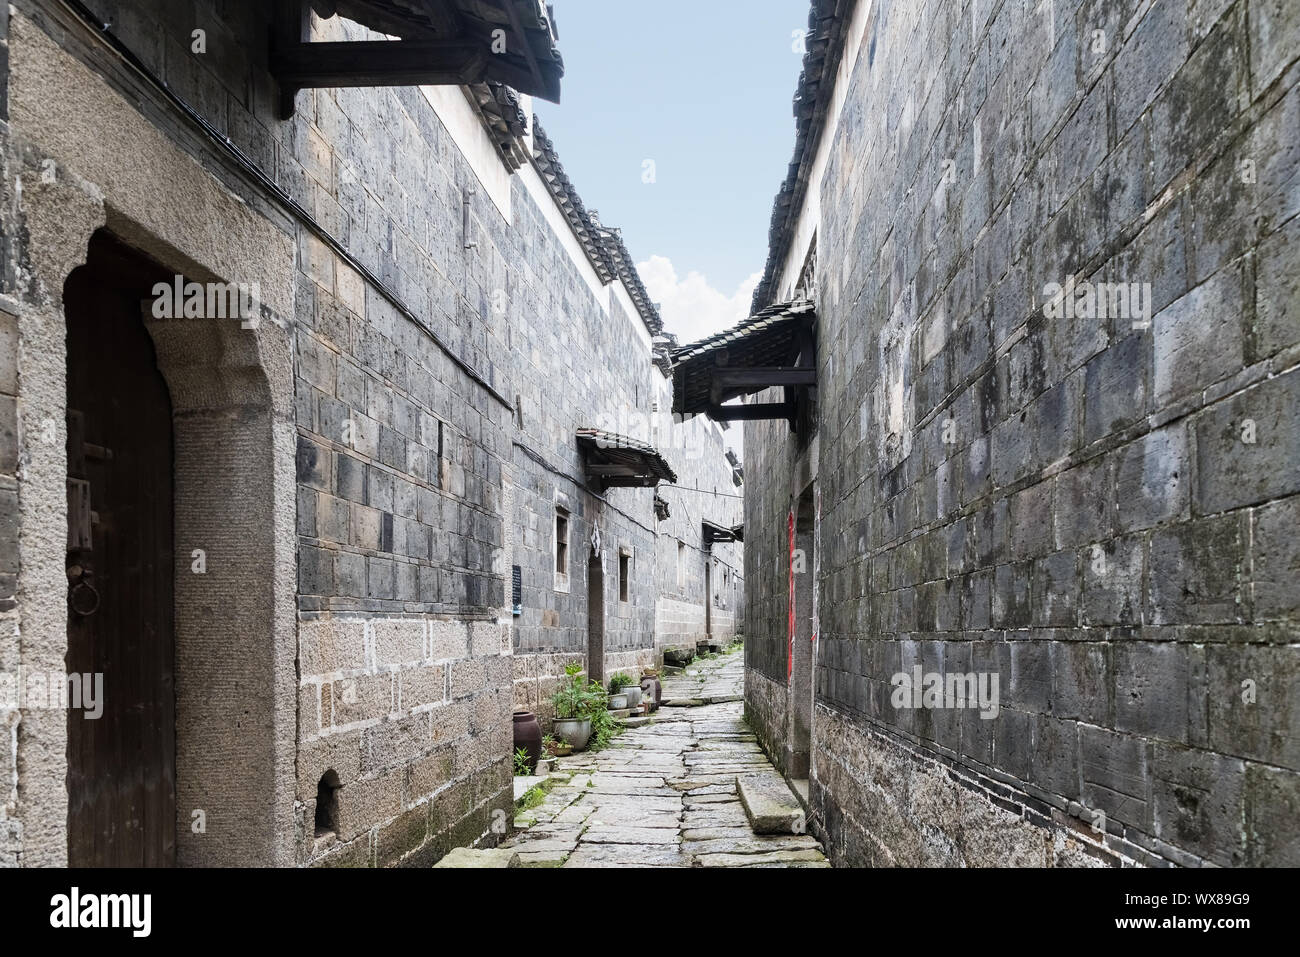 buildings of qing dynasty Stock Photo